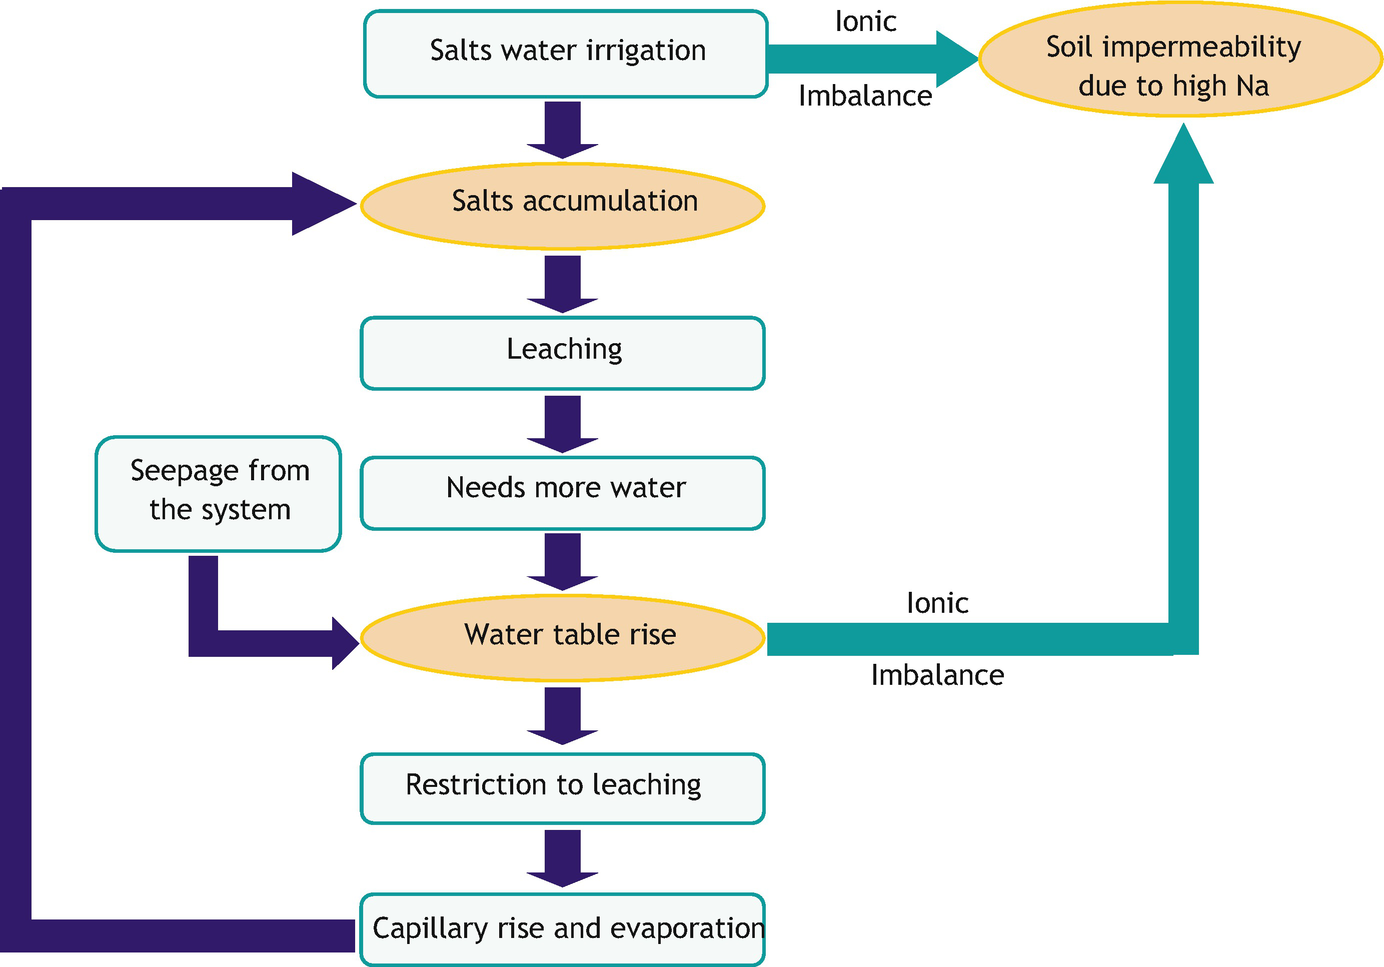 Introduction to Soil Salinity, Sodicity and Diagnostics Techniques ...